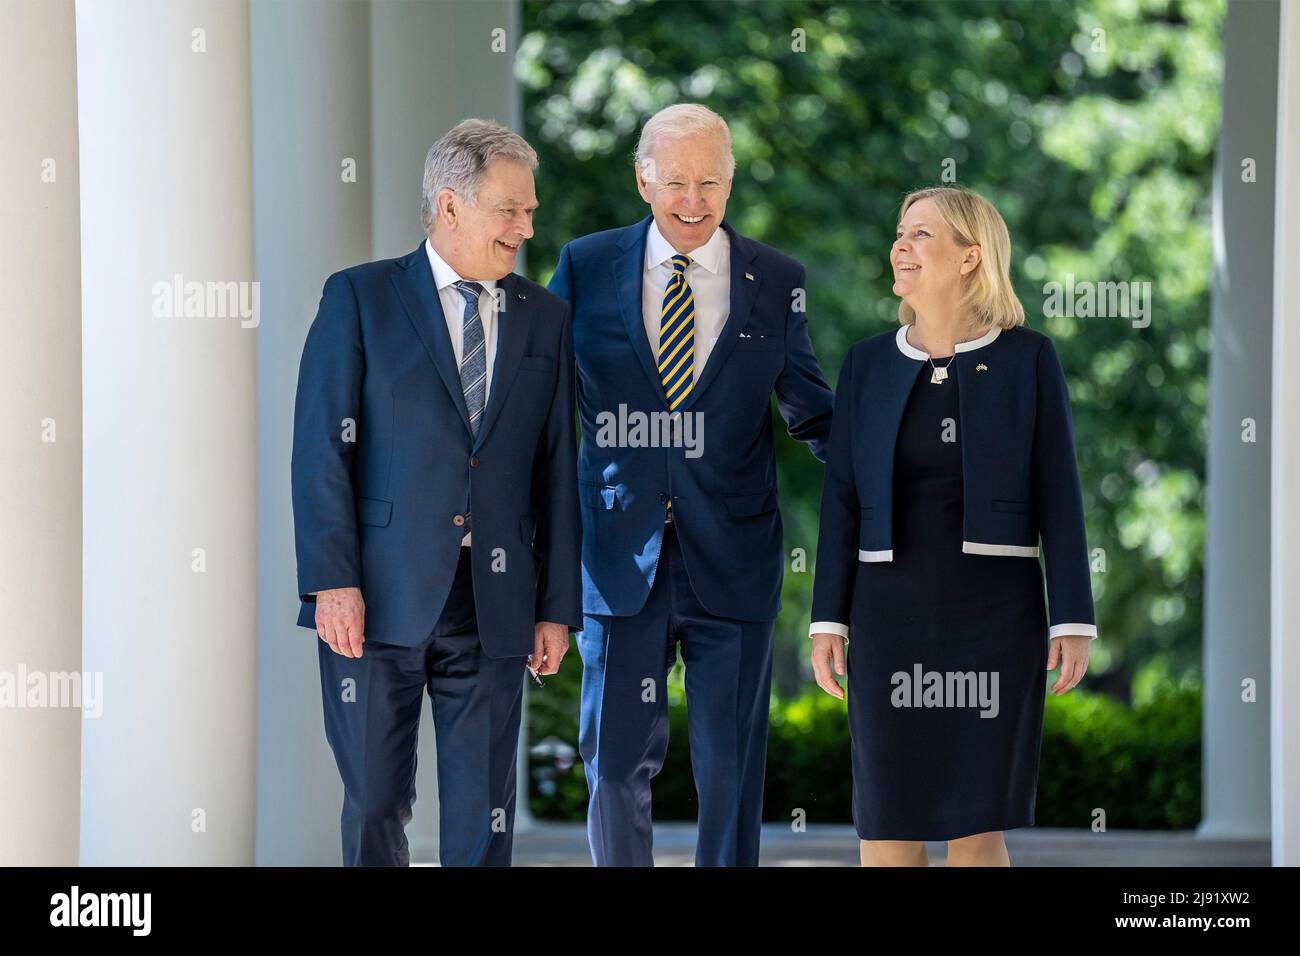 Washington, United States Of America. 19th May, 2022. Washington, United States of America. 19 May, 2022. U.S President Joe Biden, center, walks along the Colonnade with Swedish Prime Minister Magdalena Andersson, right, and Finnish President Sauli Niinisto on the way to the Rose Garden at the White House, May 19, 2022 in Washington, DC Credit: Adam Schultz/White House Photo/Alamy Live News Stock Photo